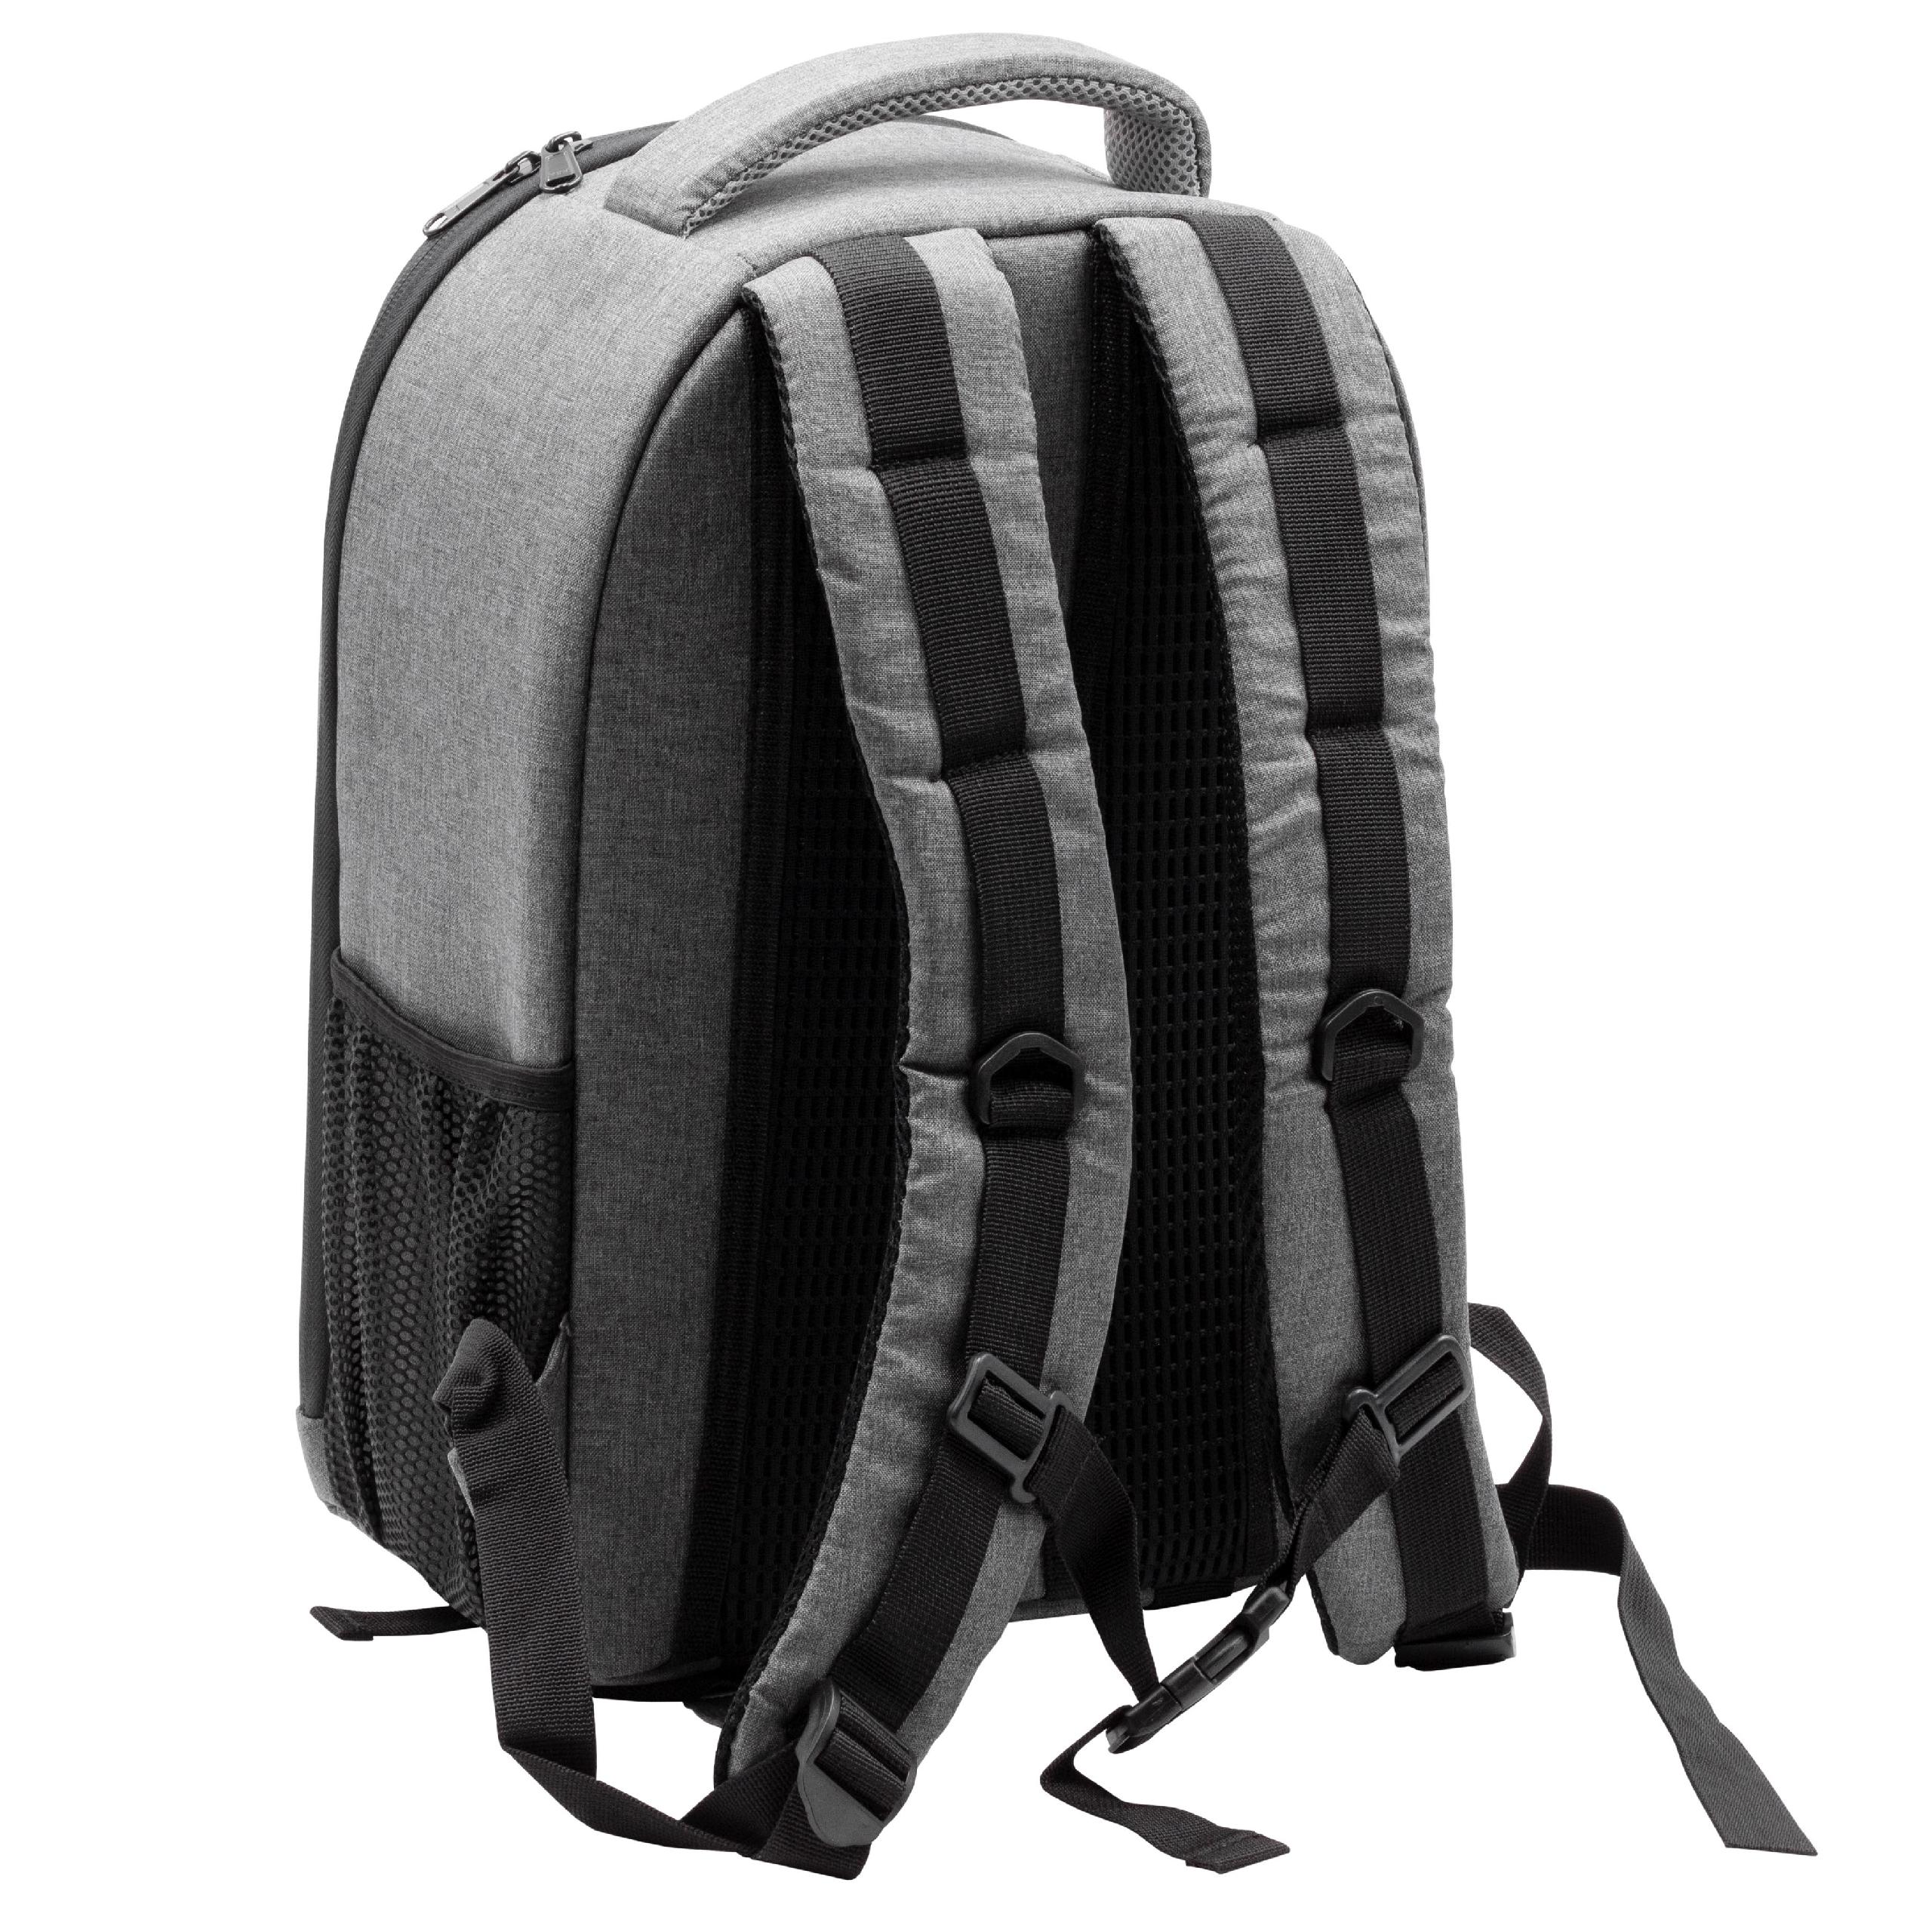 Rucksack suitable for K-70 Pentax Camera etc. - soft inner lining, canvas, grey